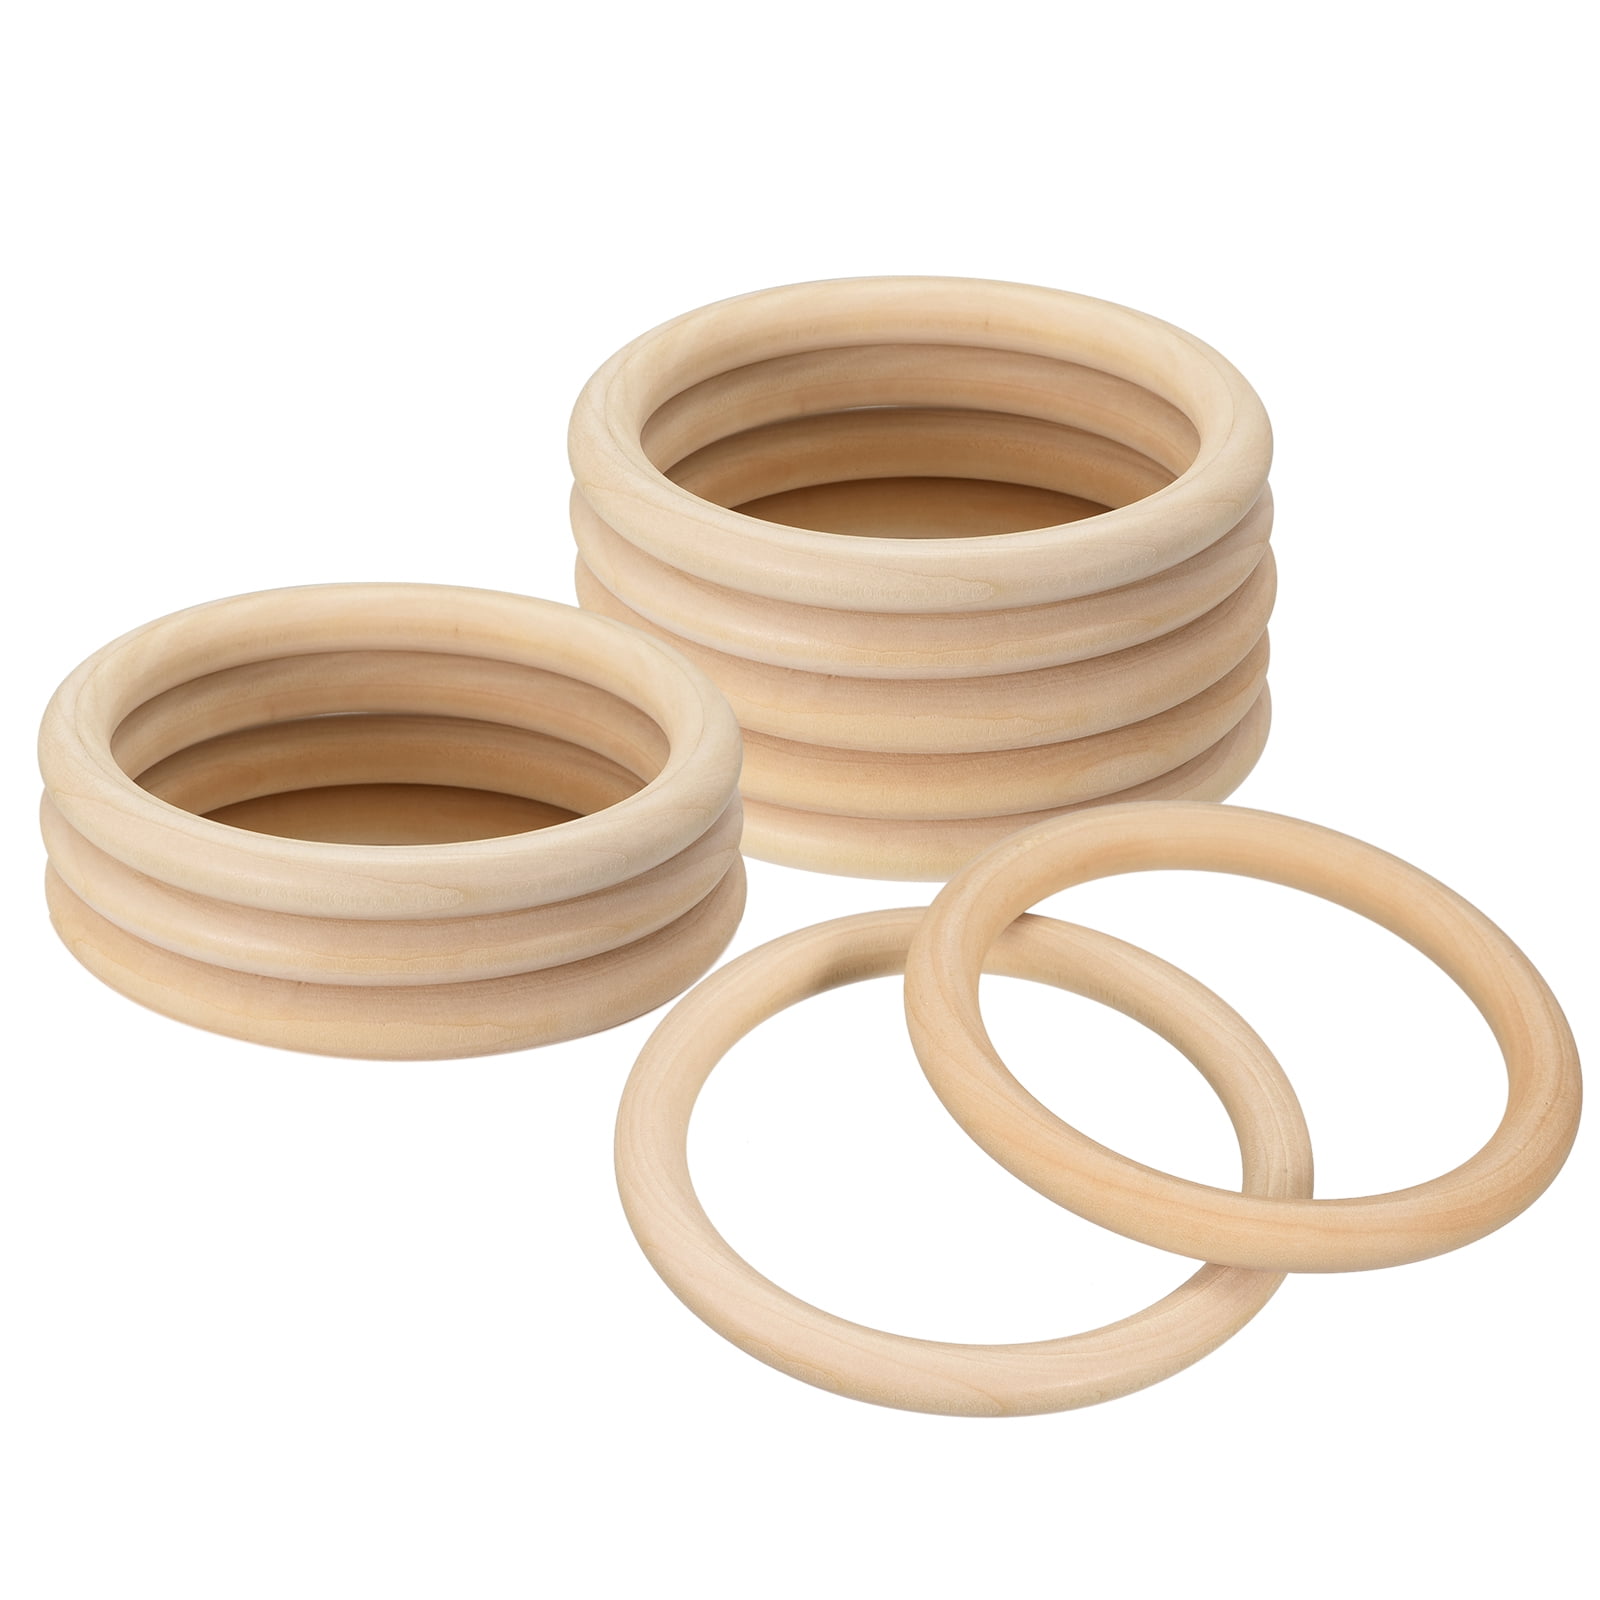 Wood Rings for Crafts 3 Inch, Pack of 5 Unfinished Wooden Rings for Macrame  and Jewelry-making, by Woodpeckers